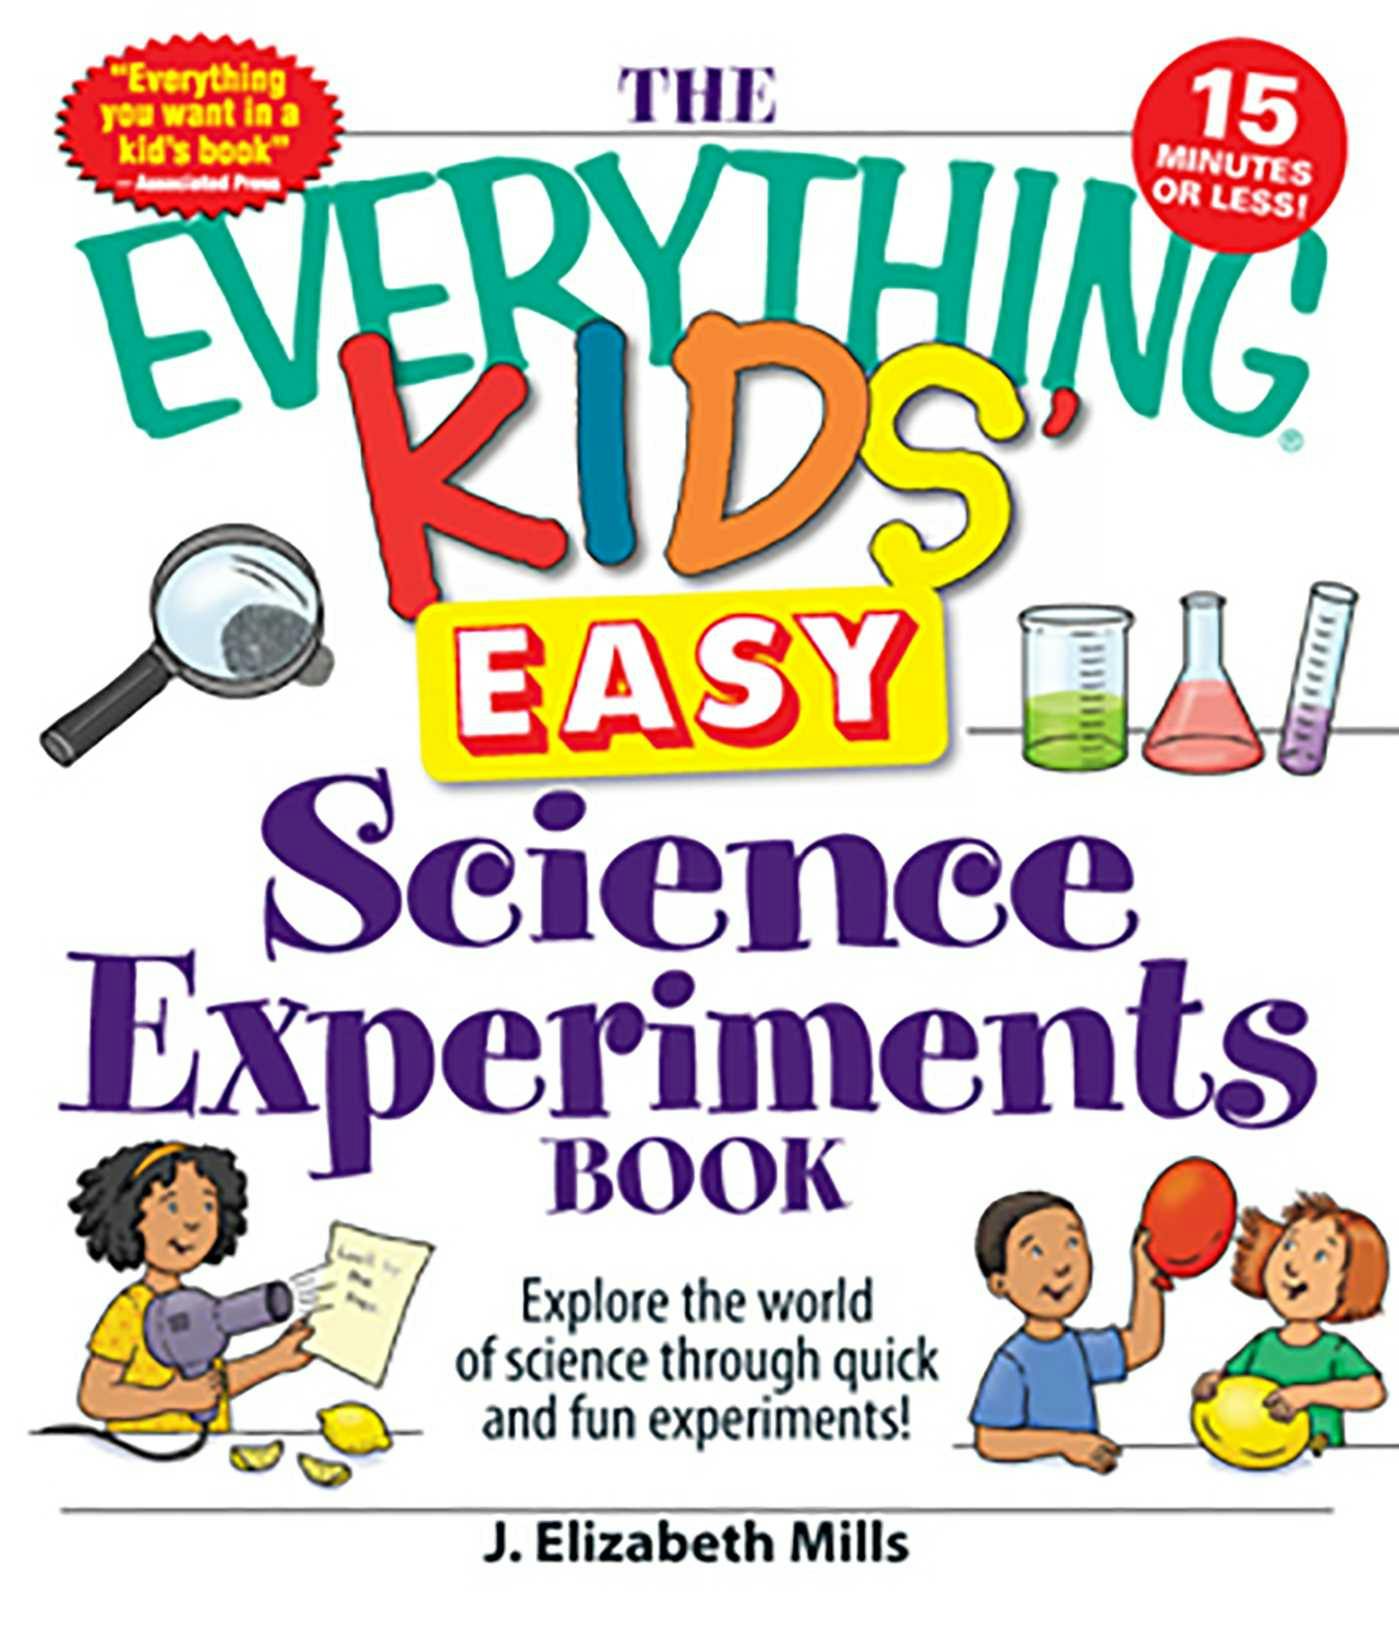 The Everything Kids' Easy Science Experiments Book: Explore the world of science through quick and fun experiments! - J. Elizabeth Mills